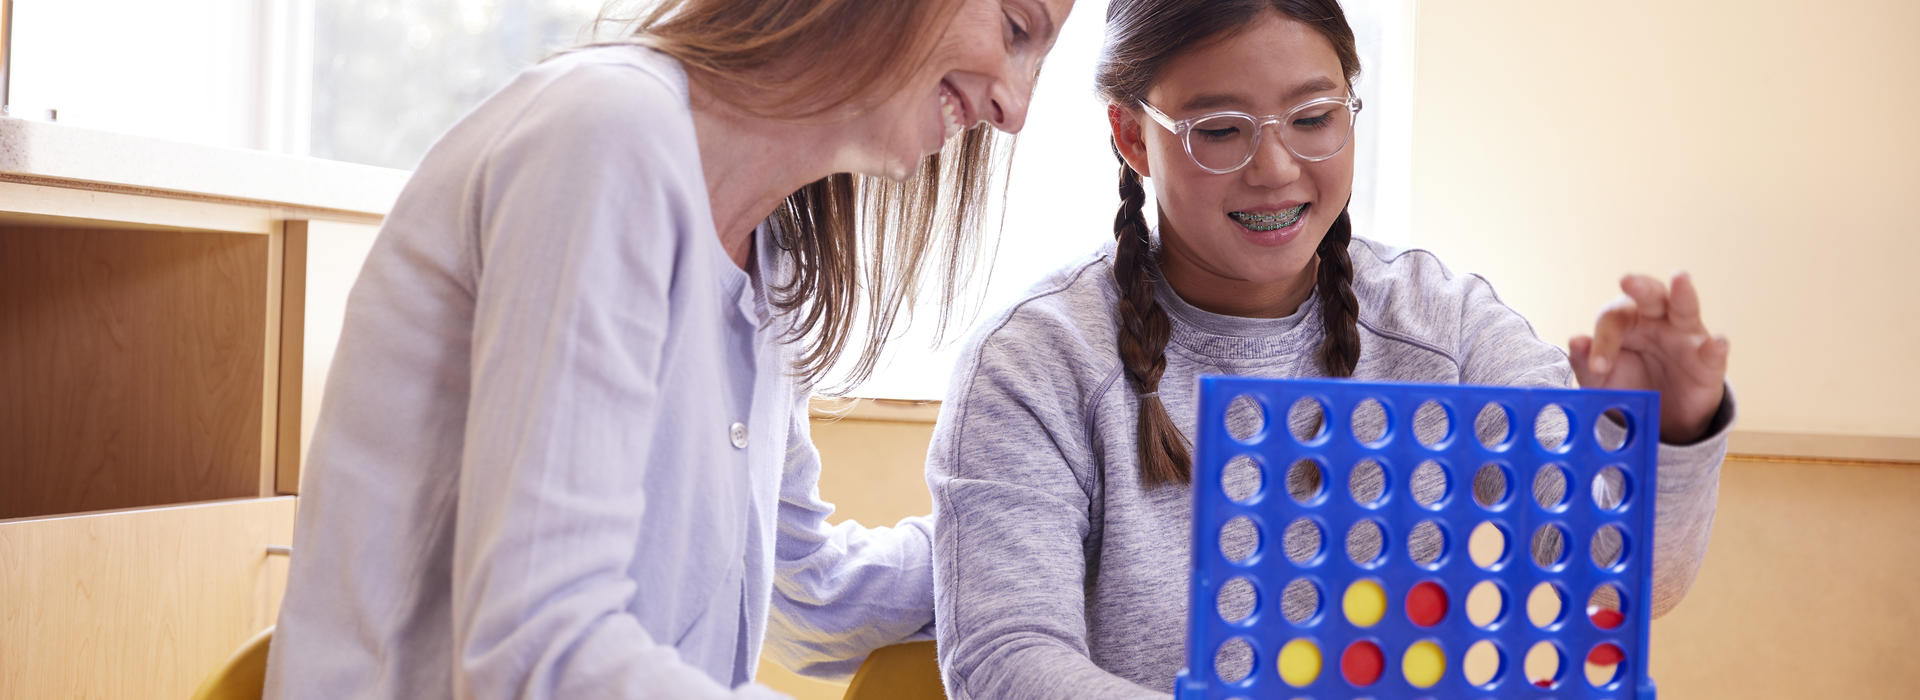 Occupational Therapist and Child Playing Connect 4